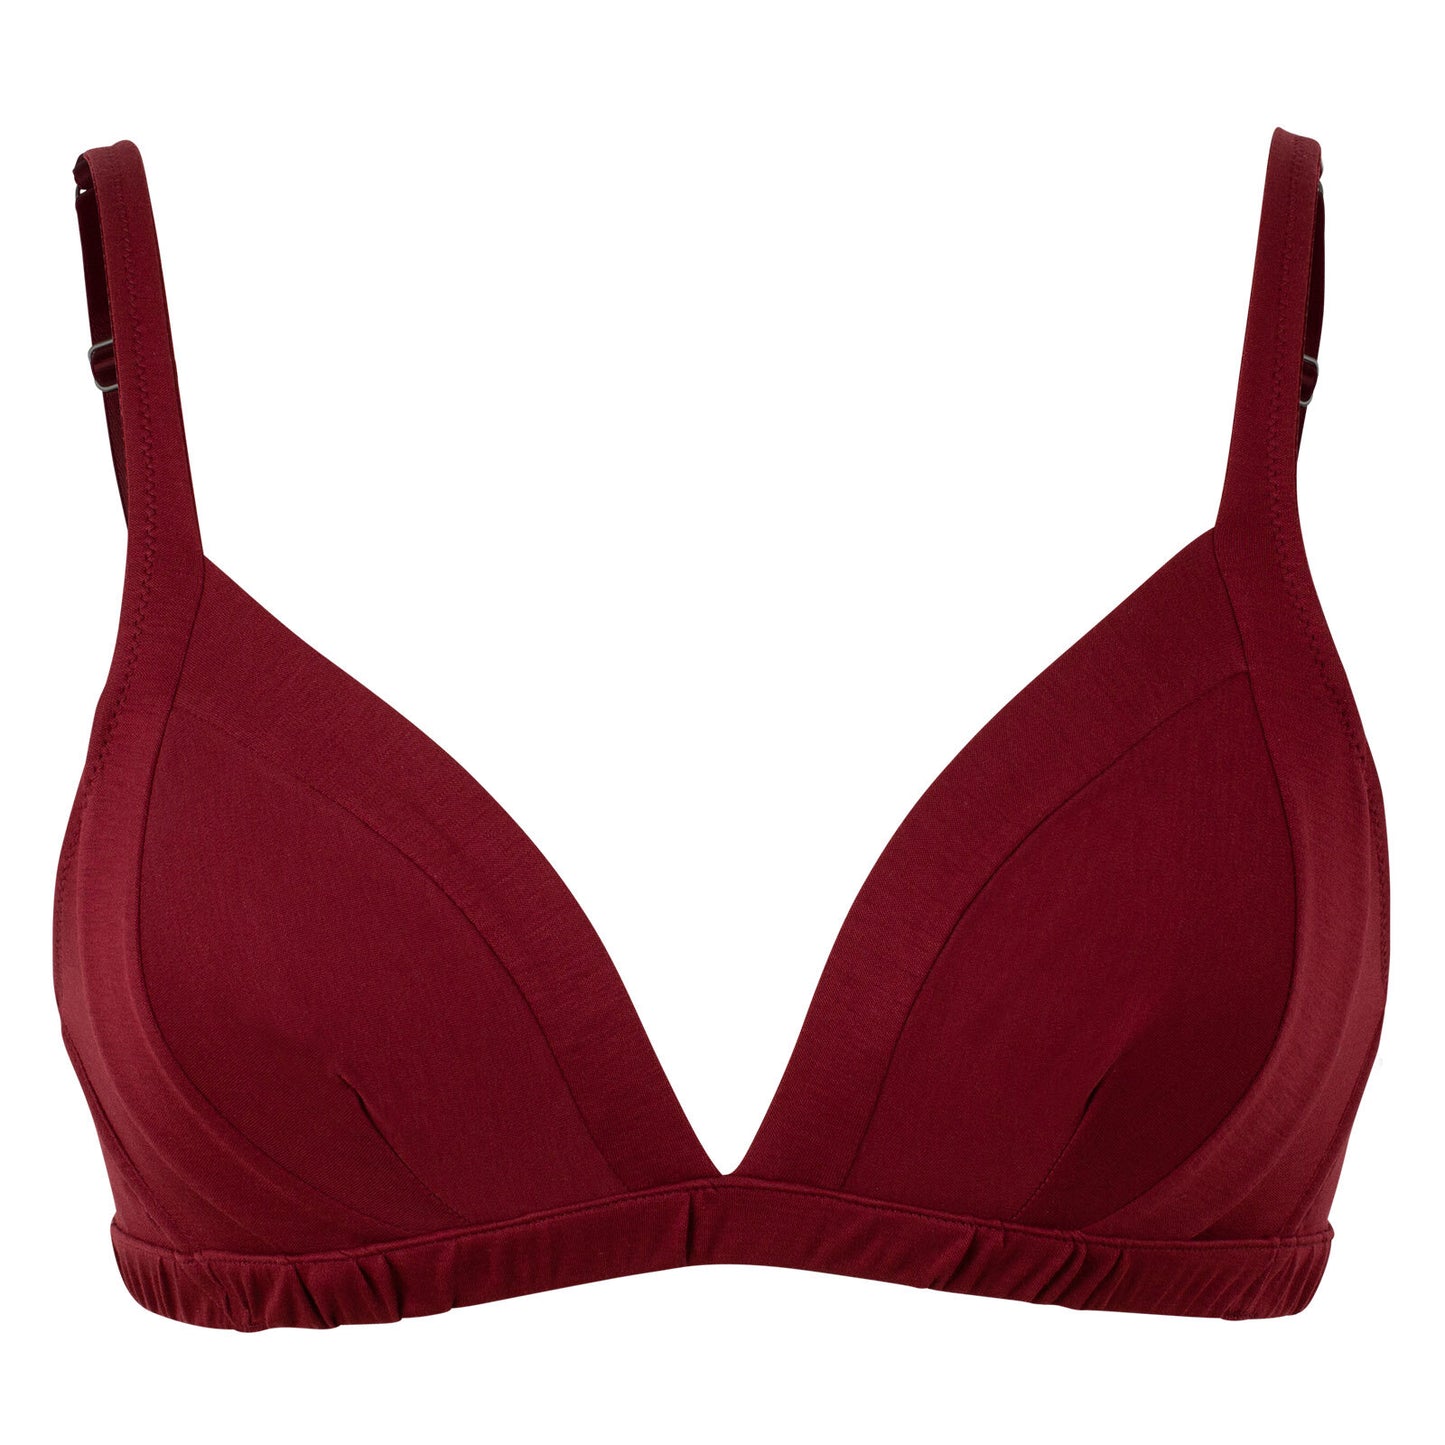 BLS - Clarise Non Wired And Non Padded Cotton Bra - Burgundy